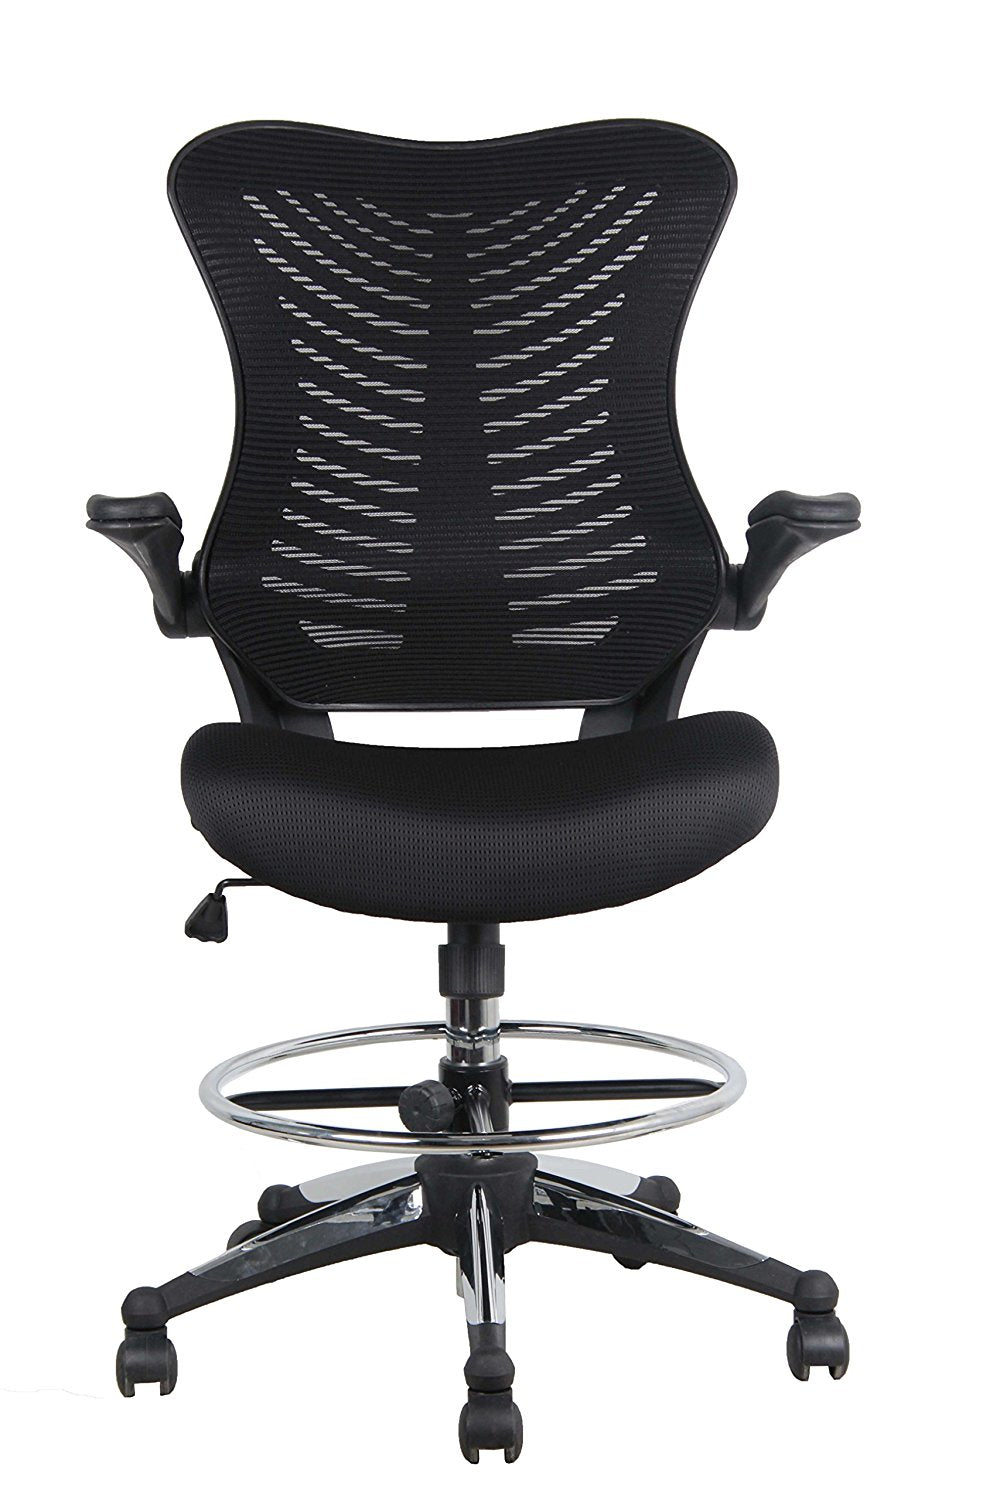 6045 Drafting Chair with Flip Up Arm $299.95